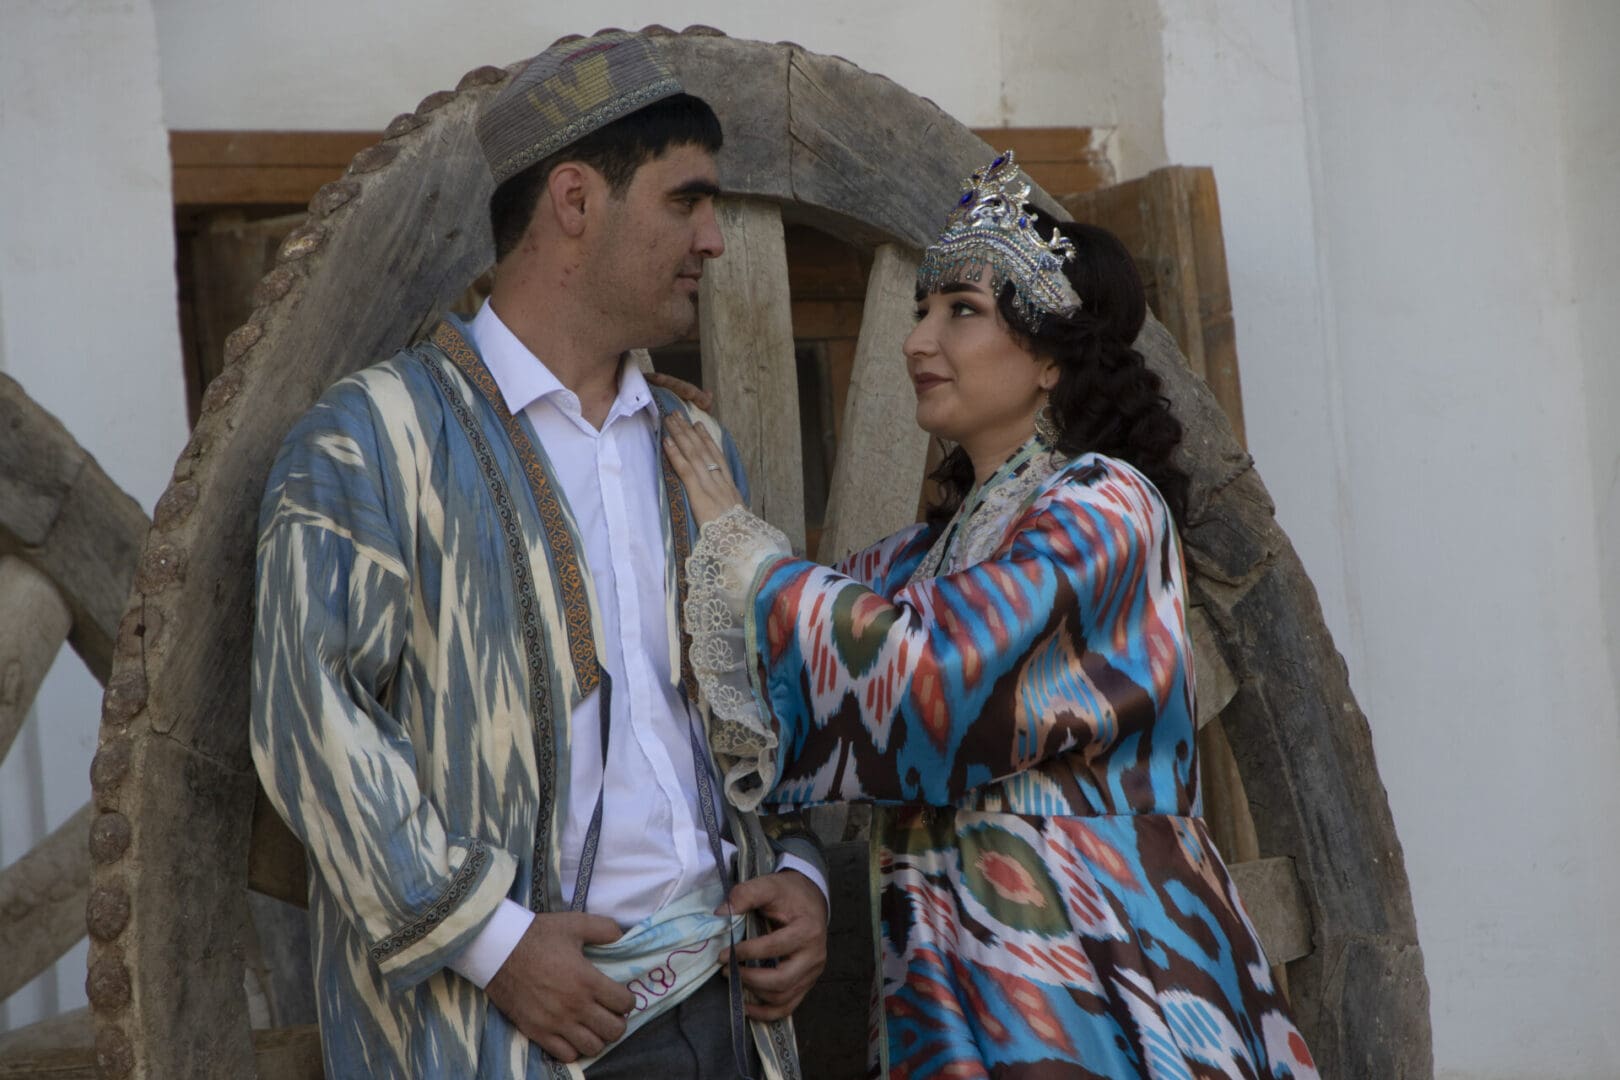 A man and a woman dressed in traditional clothing standing next to a wheel.